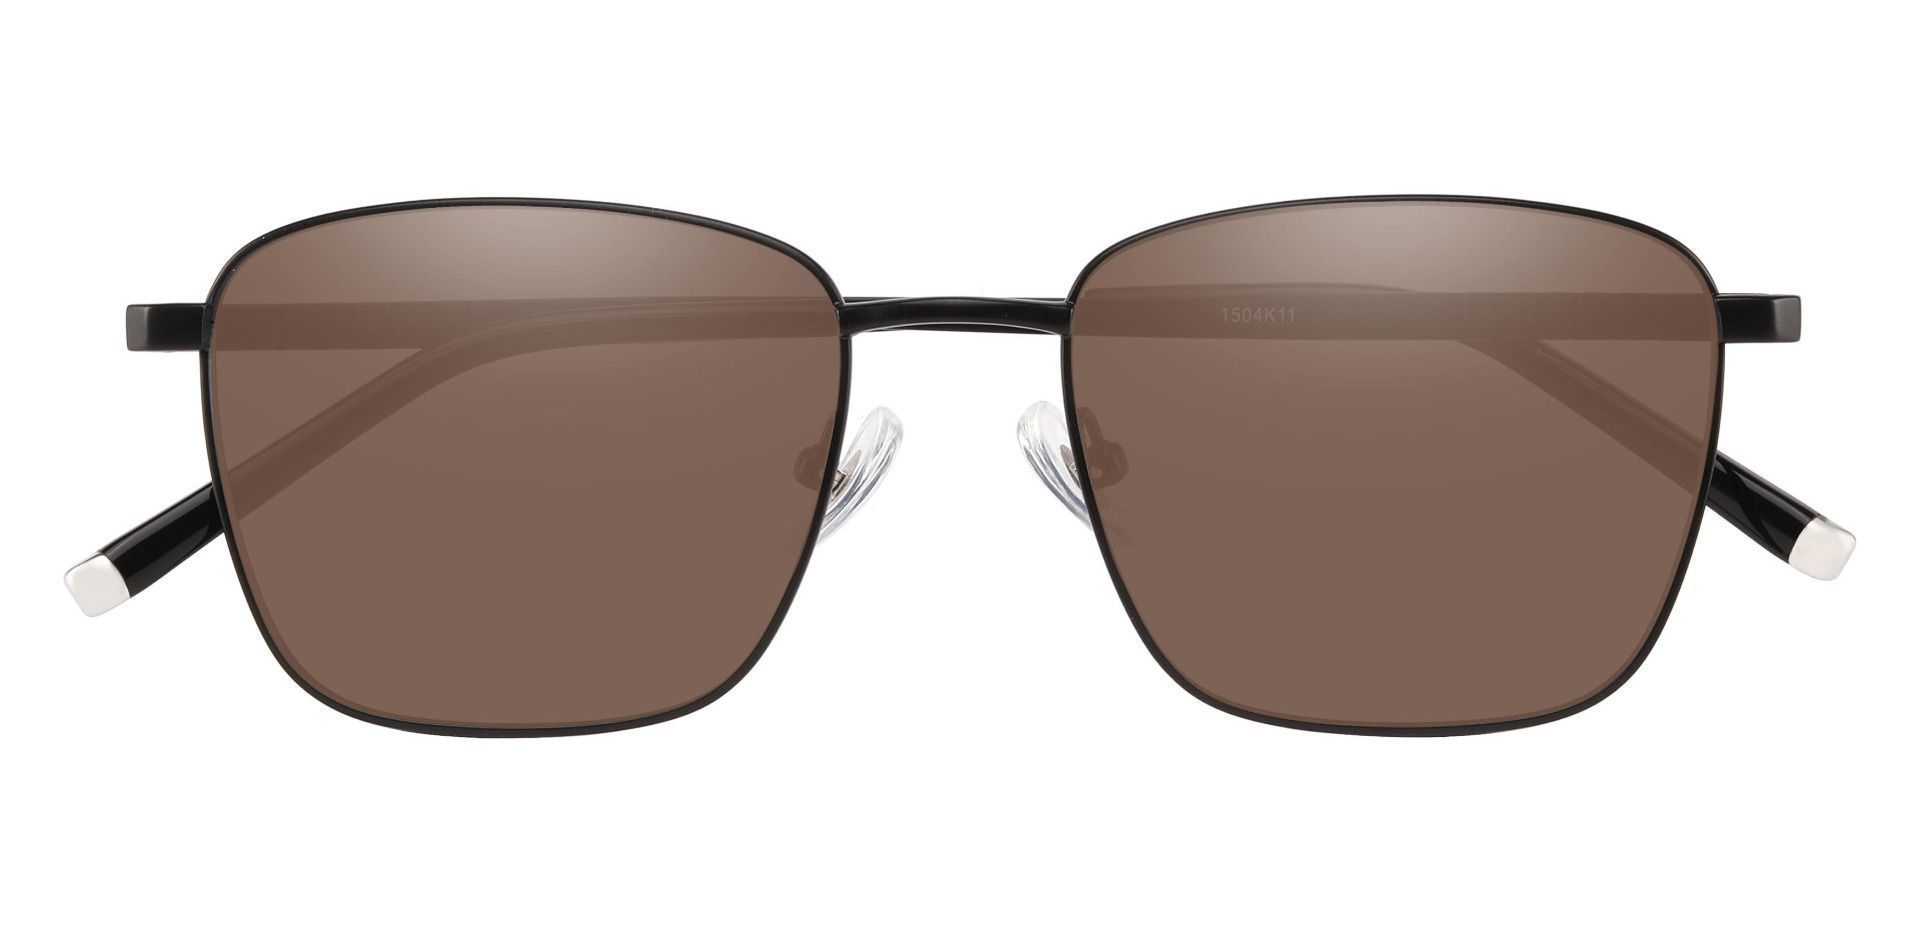 May Square Reading Sunglasses - Black Frame With Brown Lenses